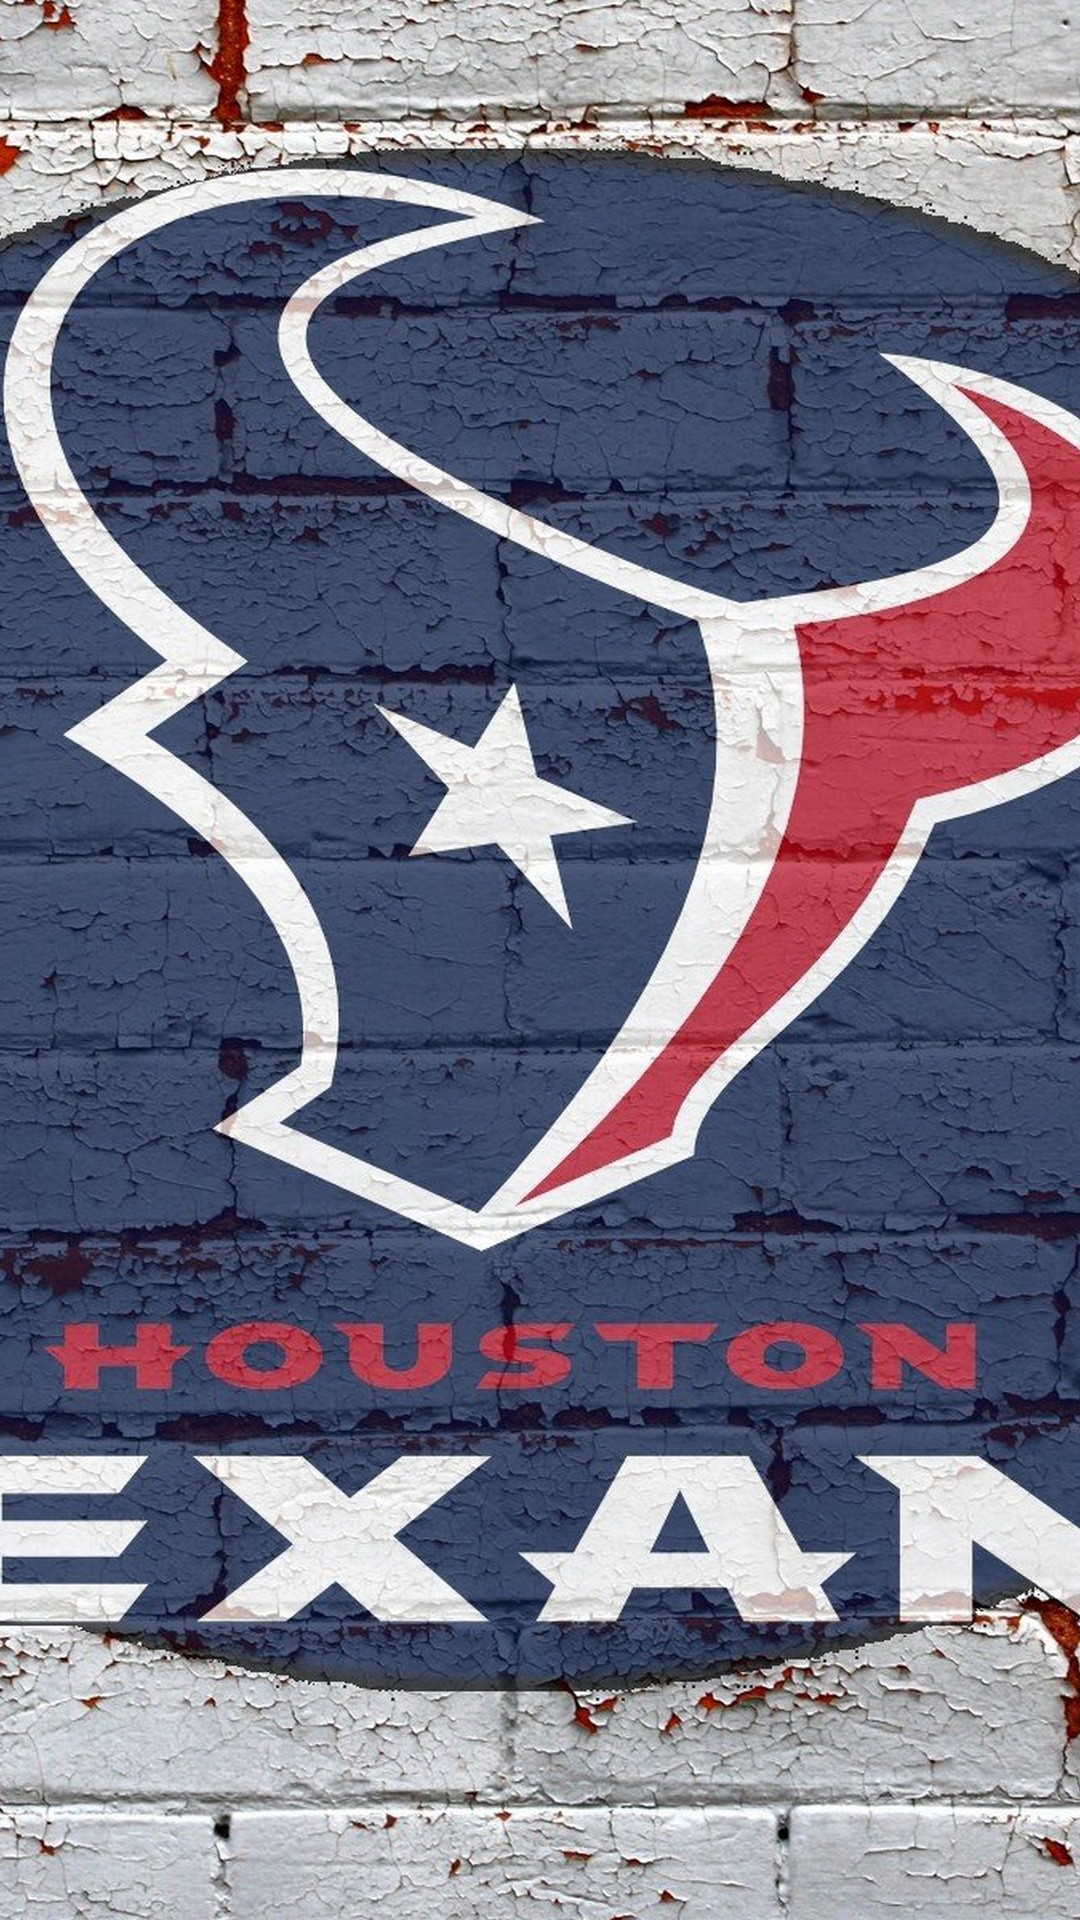 Texans iPhone Wallpaper in HD with high-resolution 1080x1920 pixel. Download and set as wallpaper for Apple iPhone X, XS Max, XR, 8, 7, 6, SE, iPad, Android